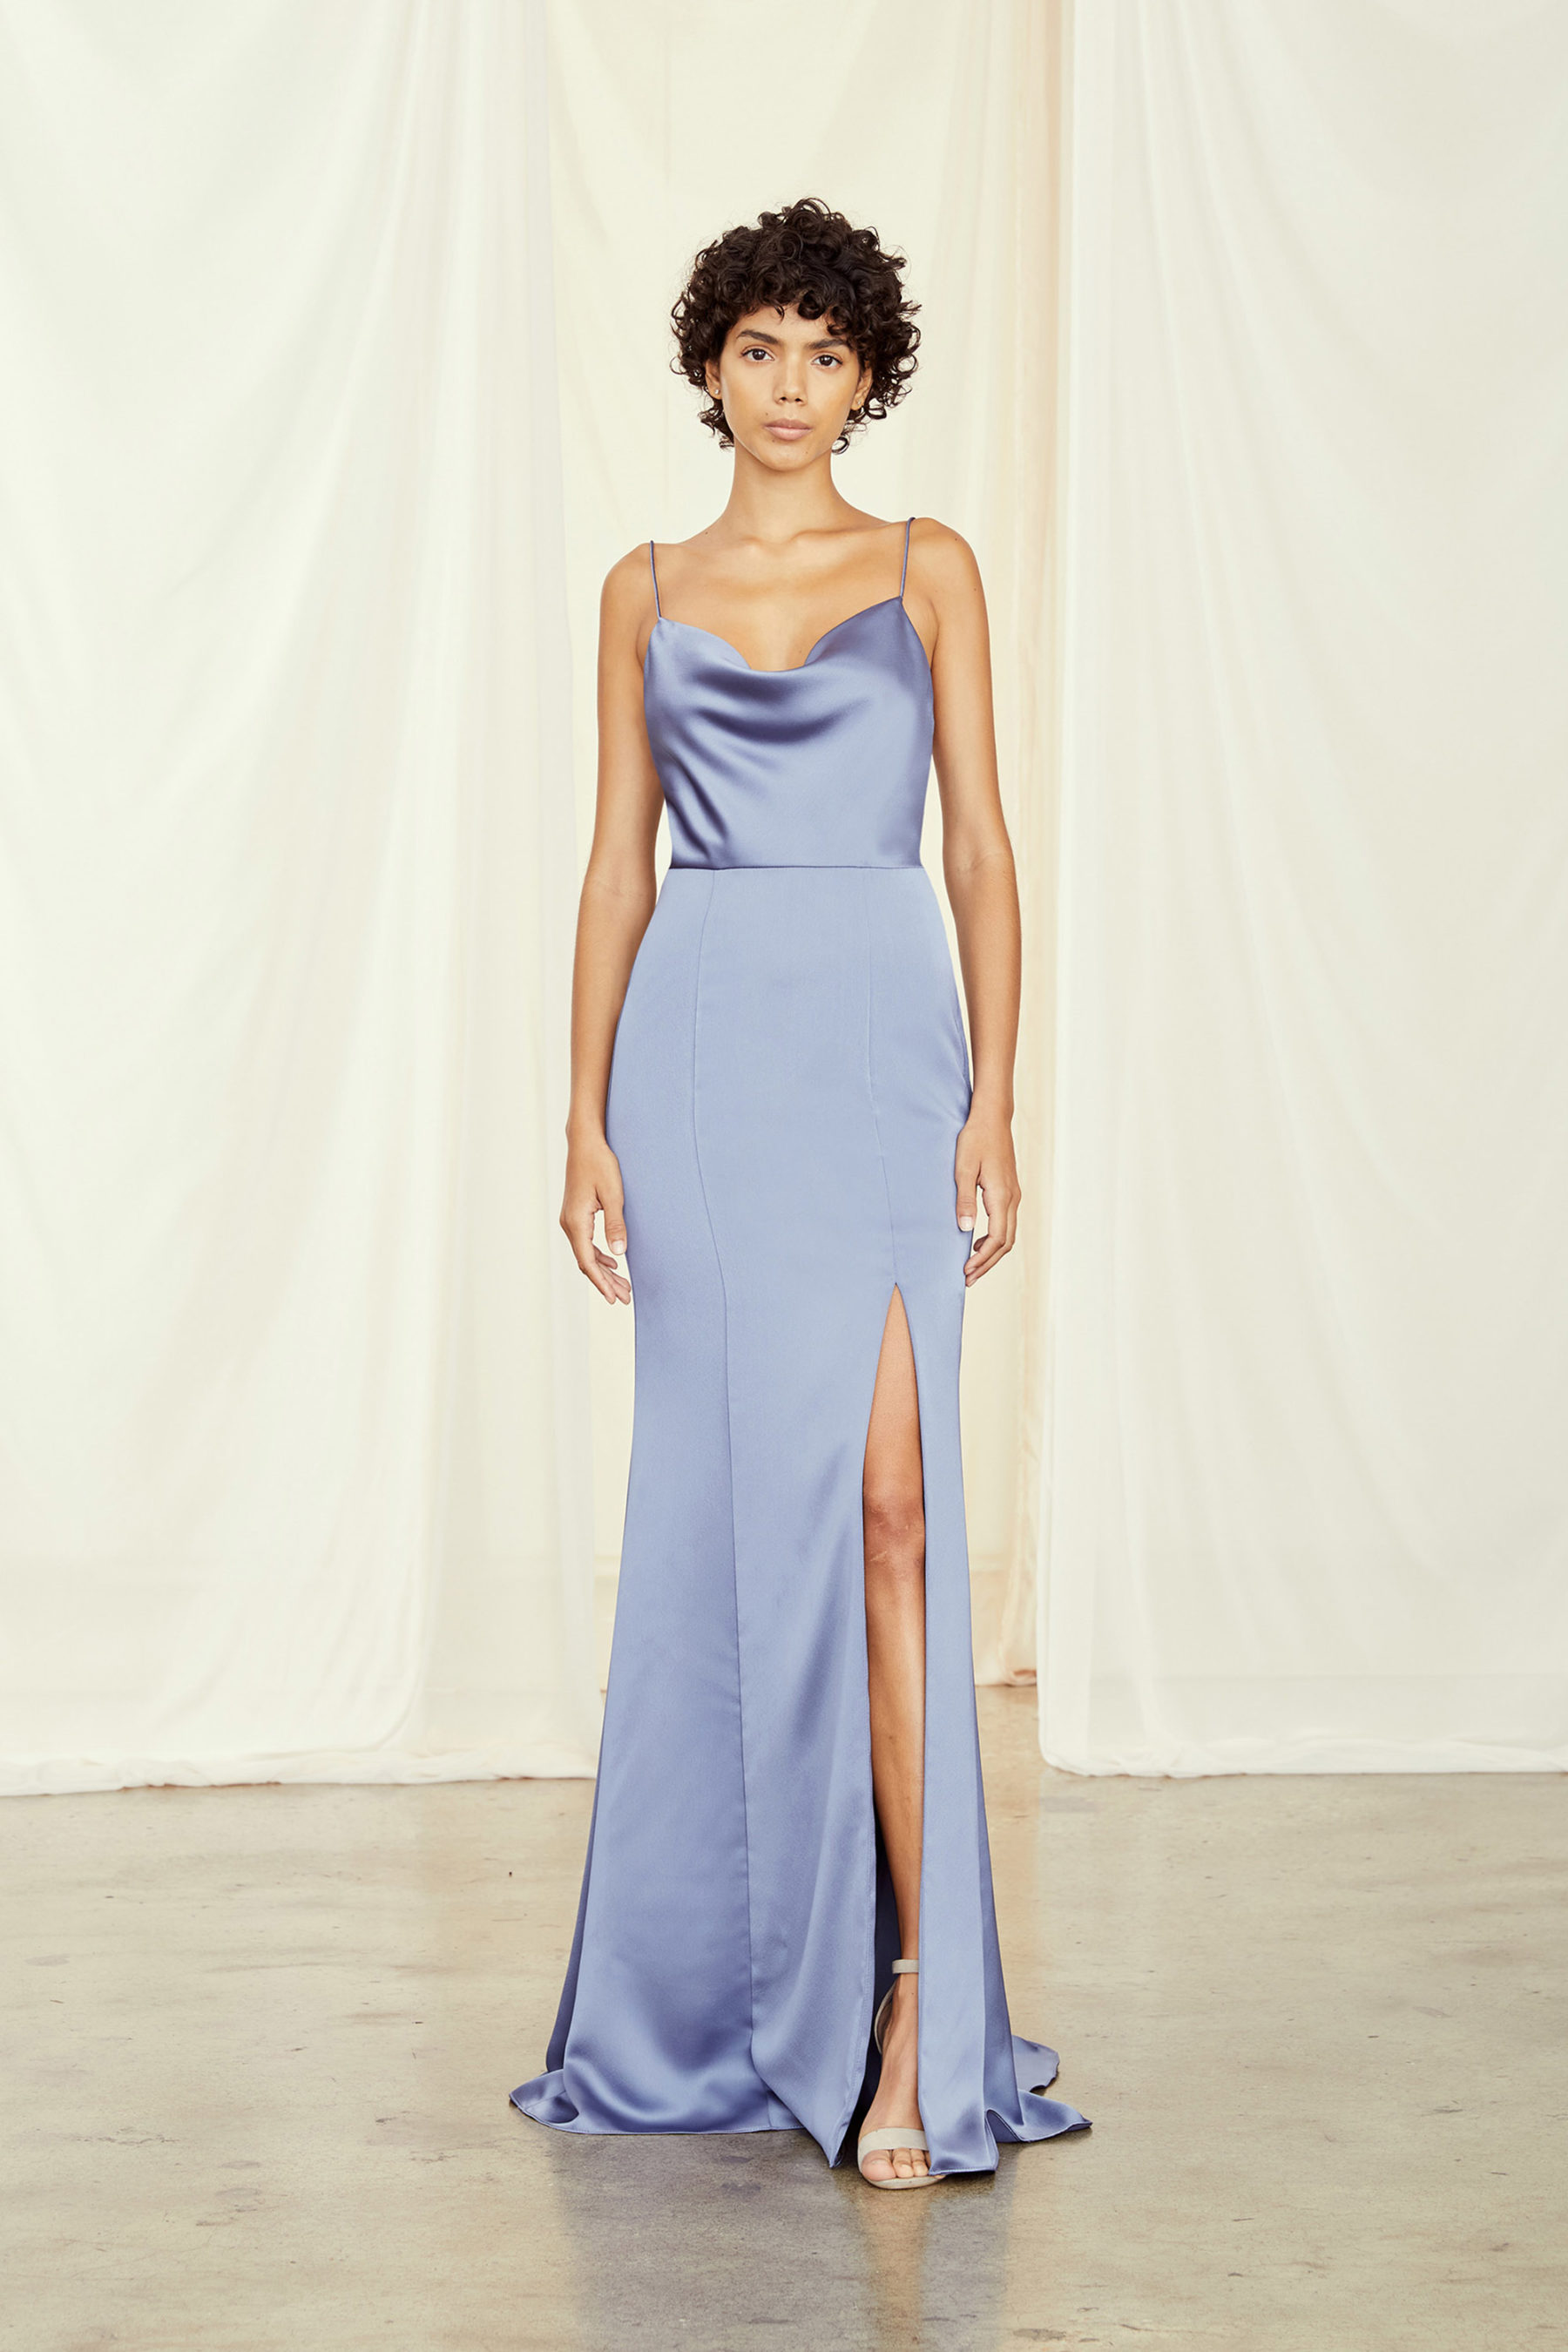 New Bridesmaid Dress Styles for 2020 at Bella Bridesmaids featured on Nashville Bride Guide